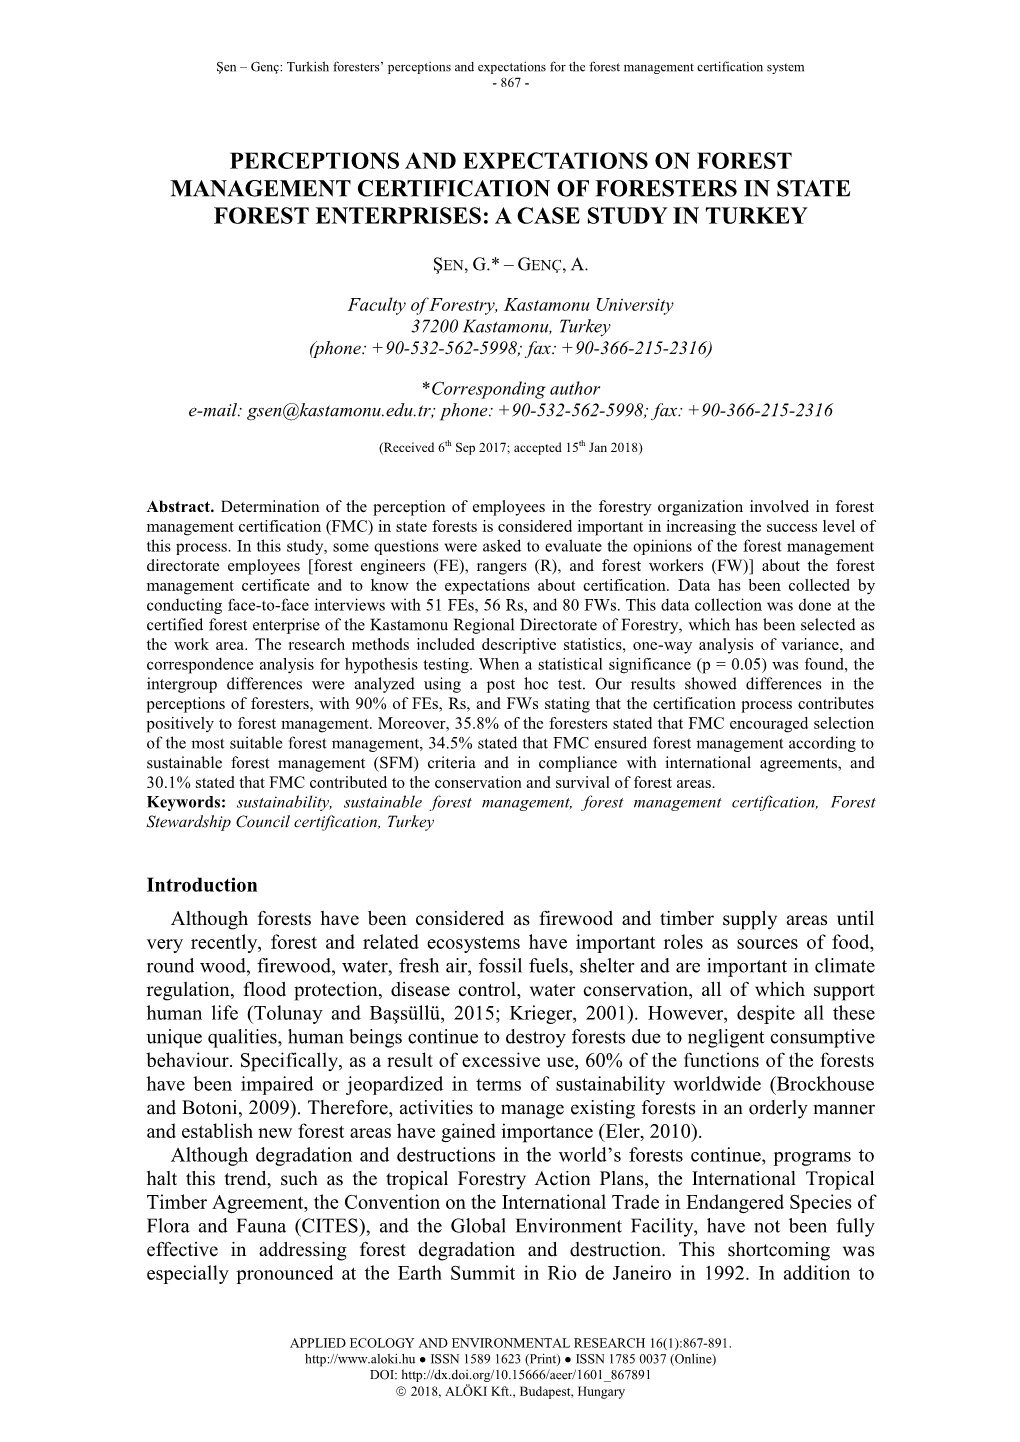 Perceptions and Expectations on Forest Management Certification of Foresters in State Forest Enterprises: a Case Study in Turkey